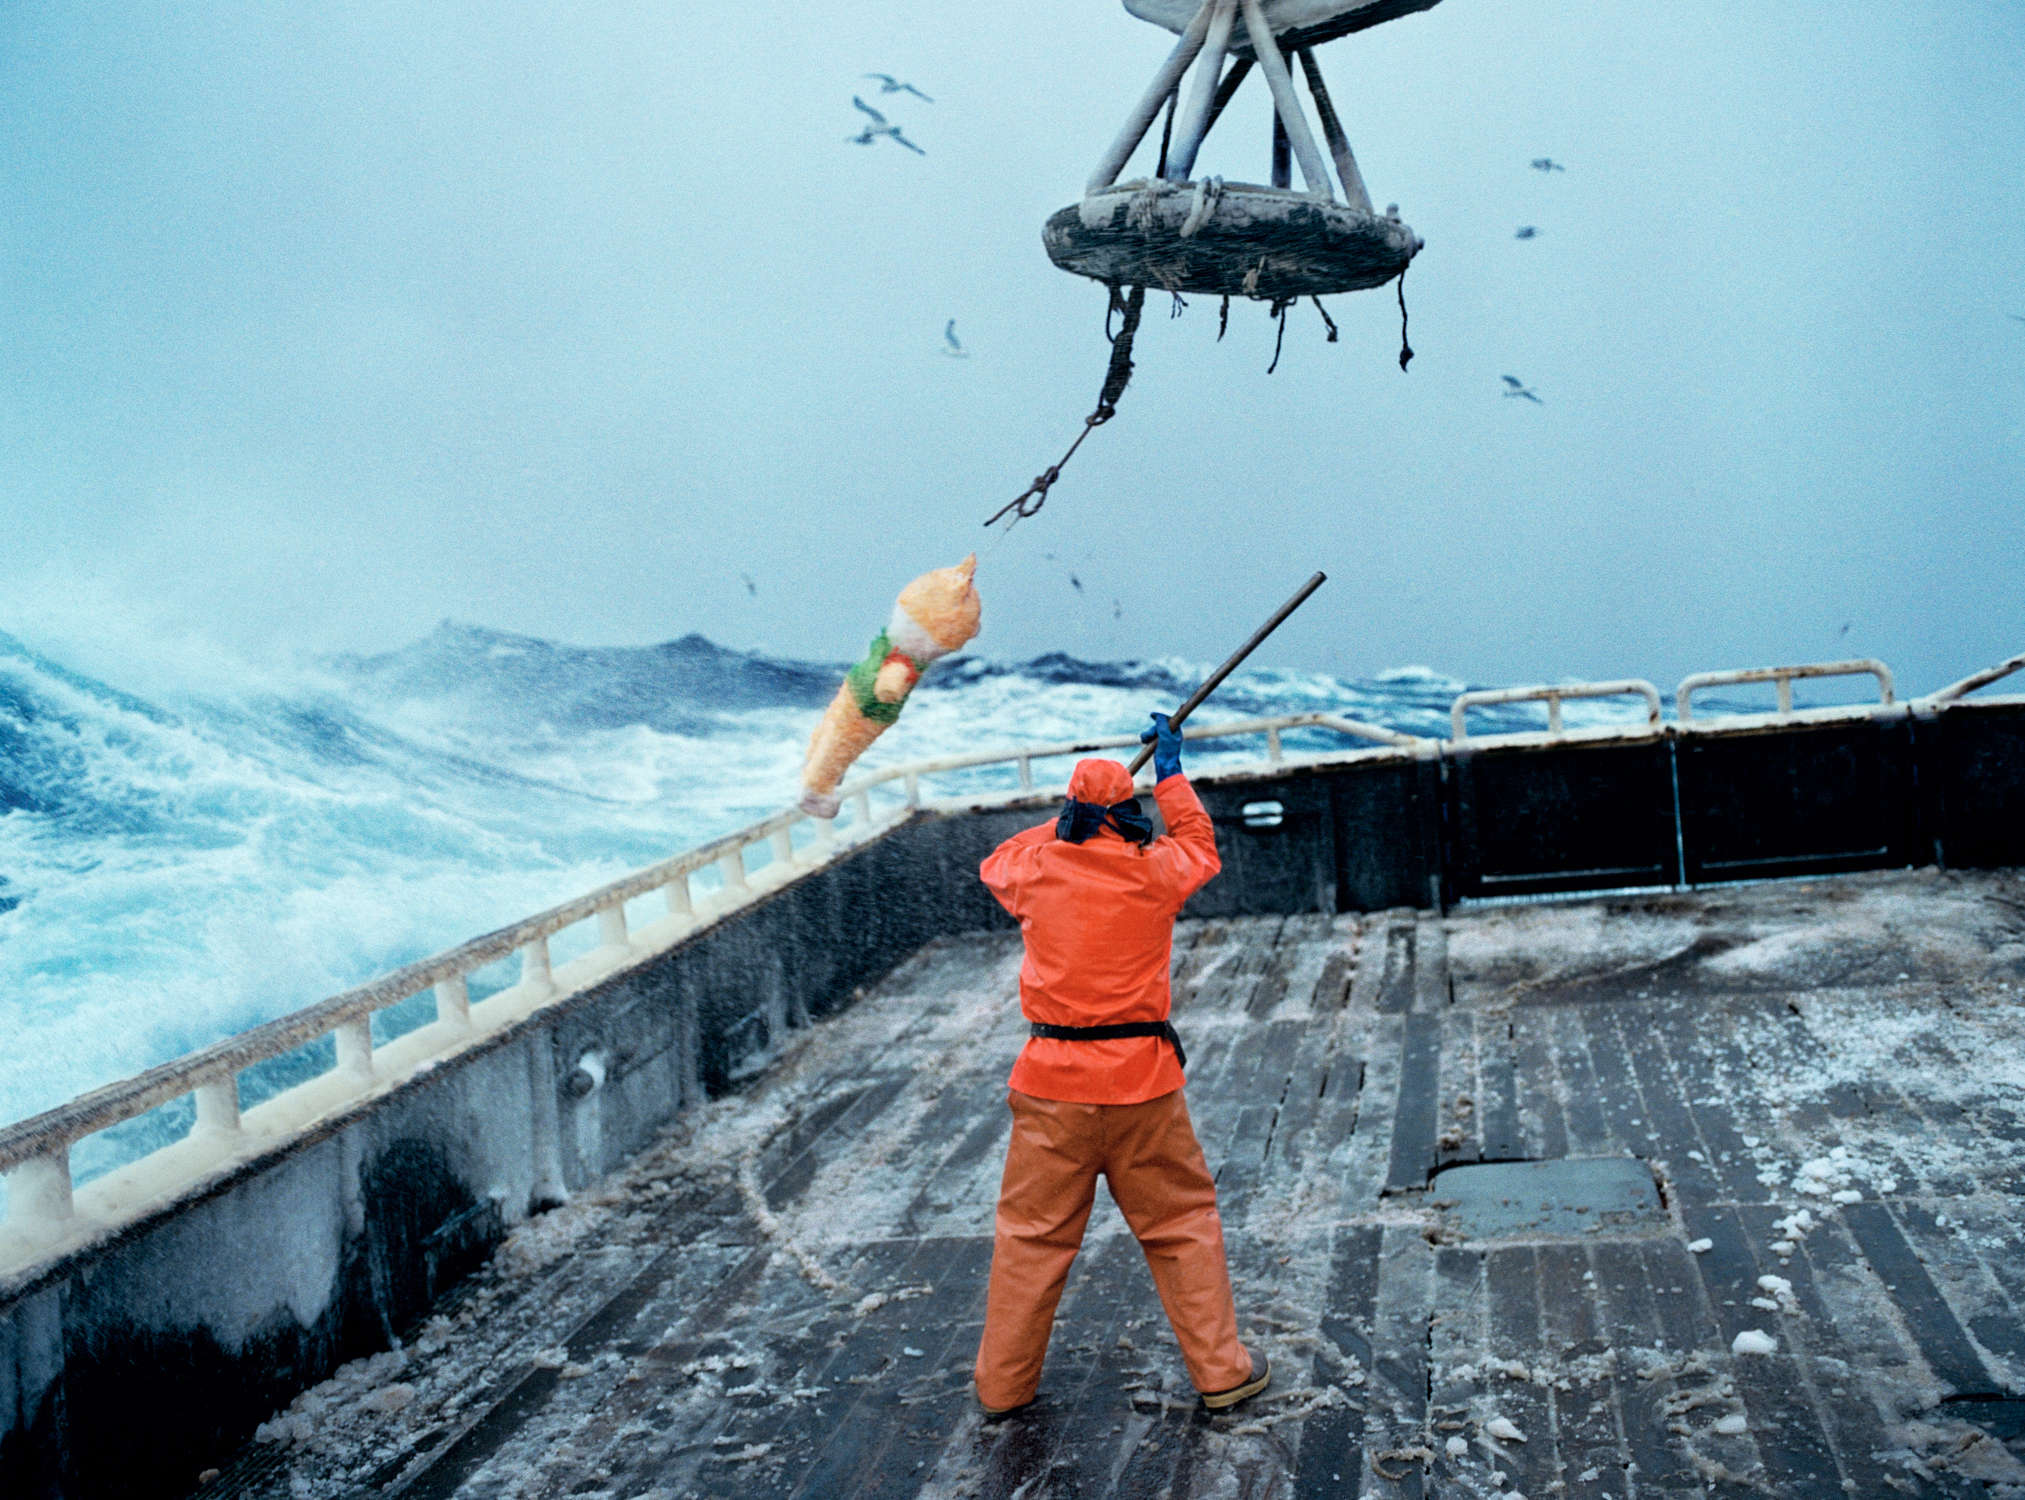 The dangerous and unbelievable lives of fisherman on Alaska's Bering Sea